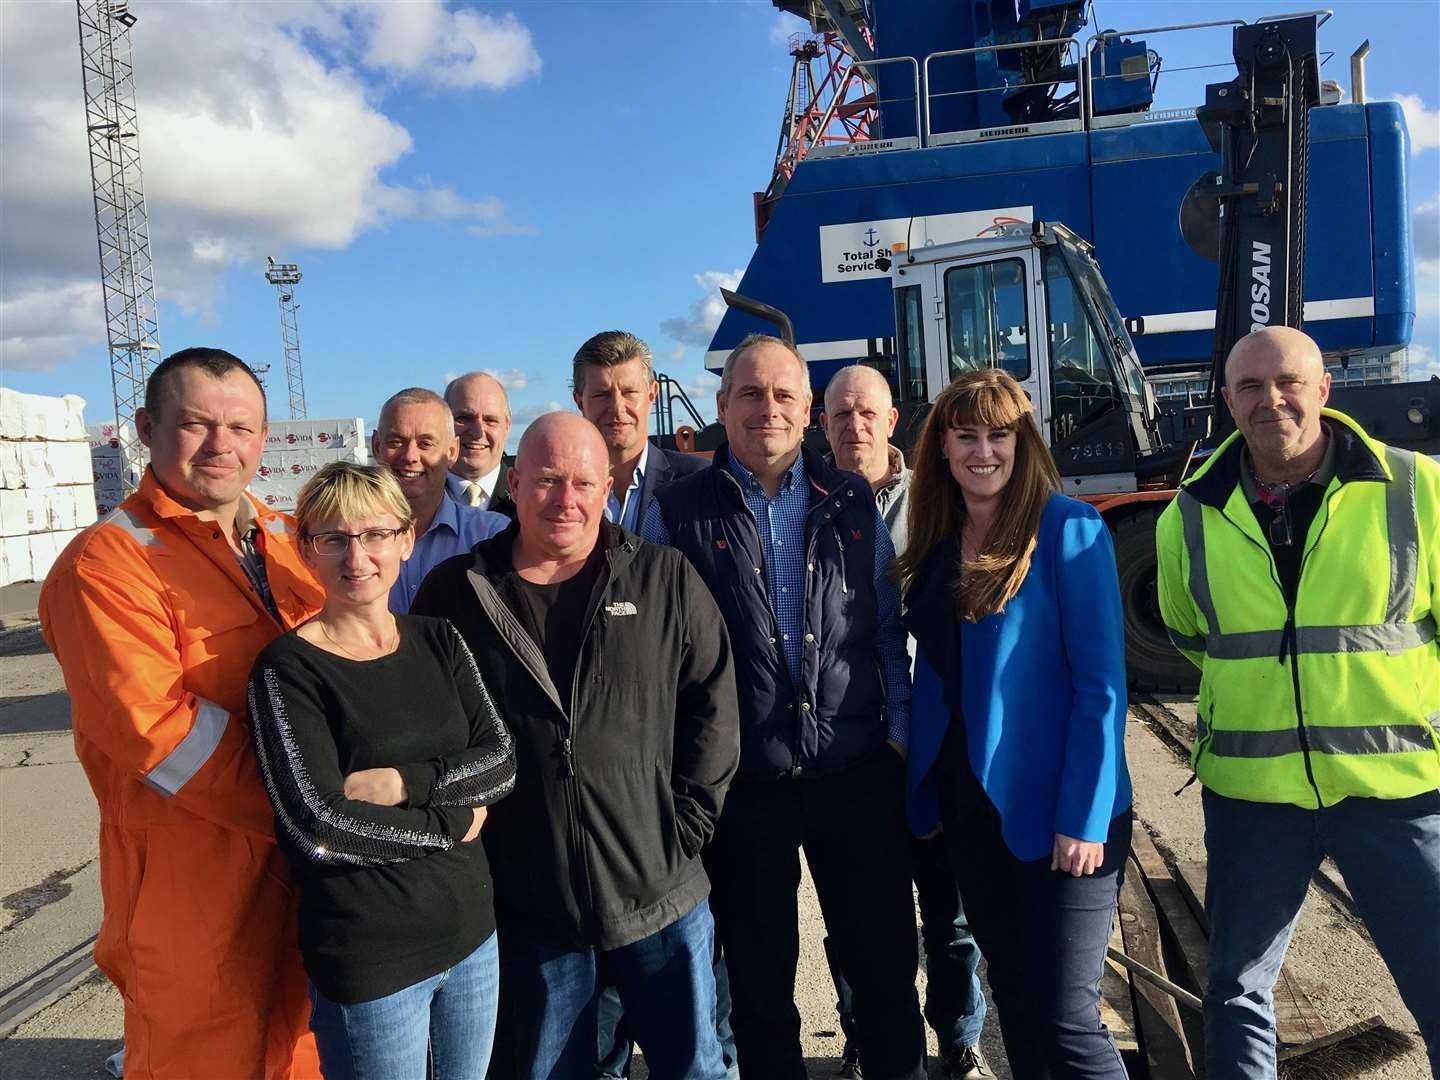 Kelly Tolhurst, MP for Rochester and Strood, met with workers at Chatham Docks last November